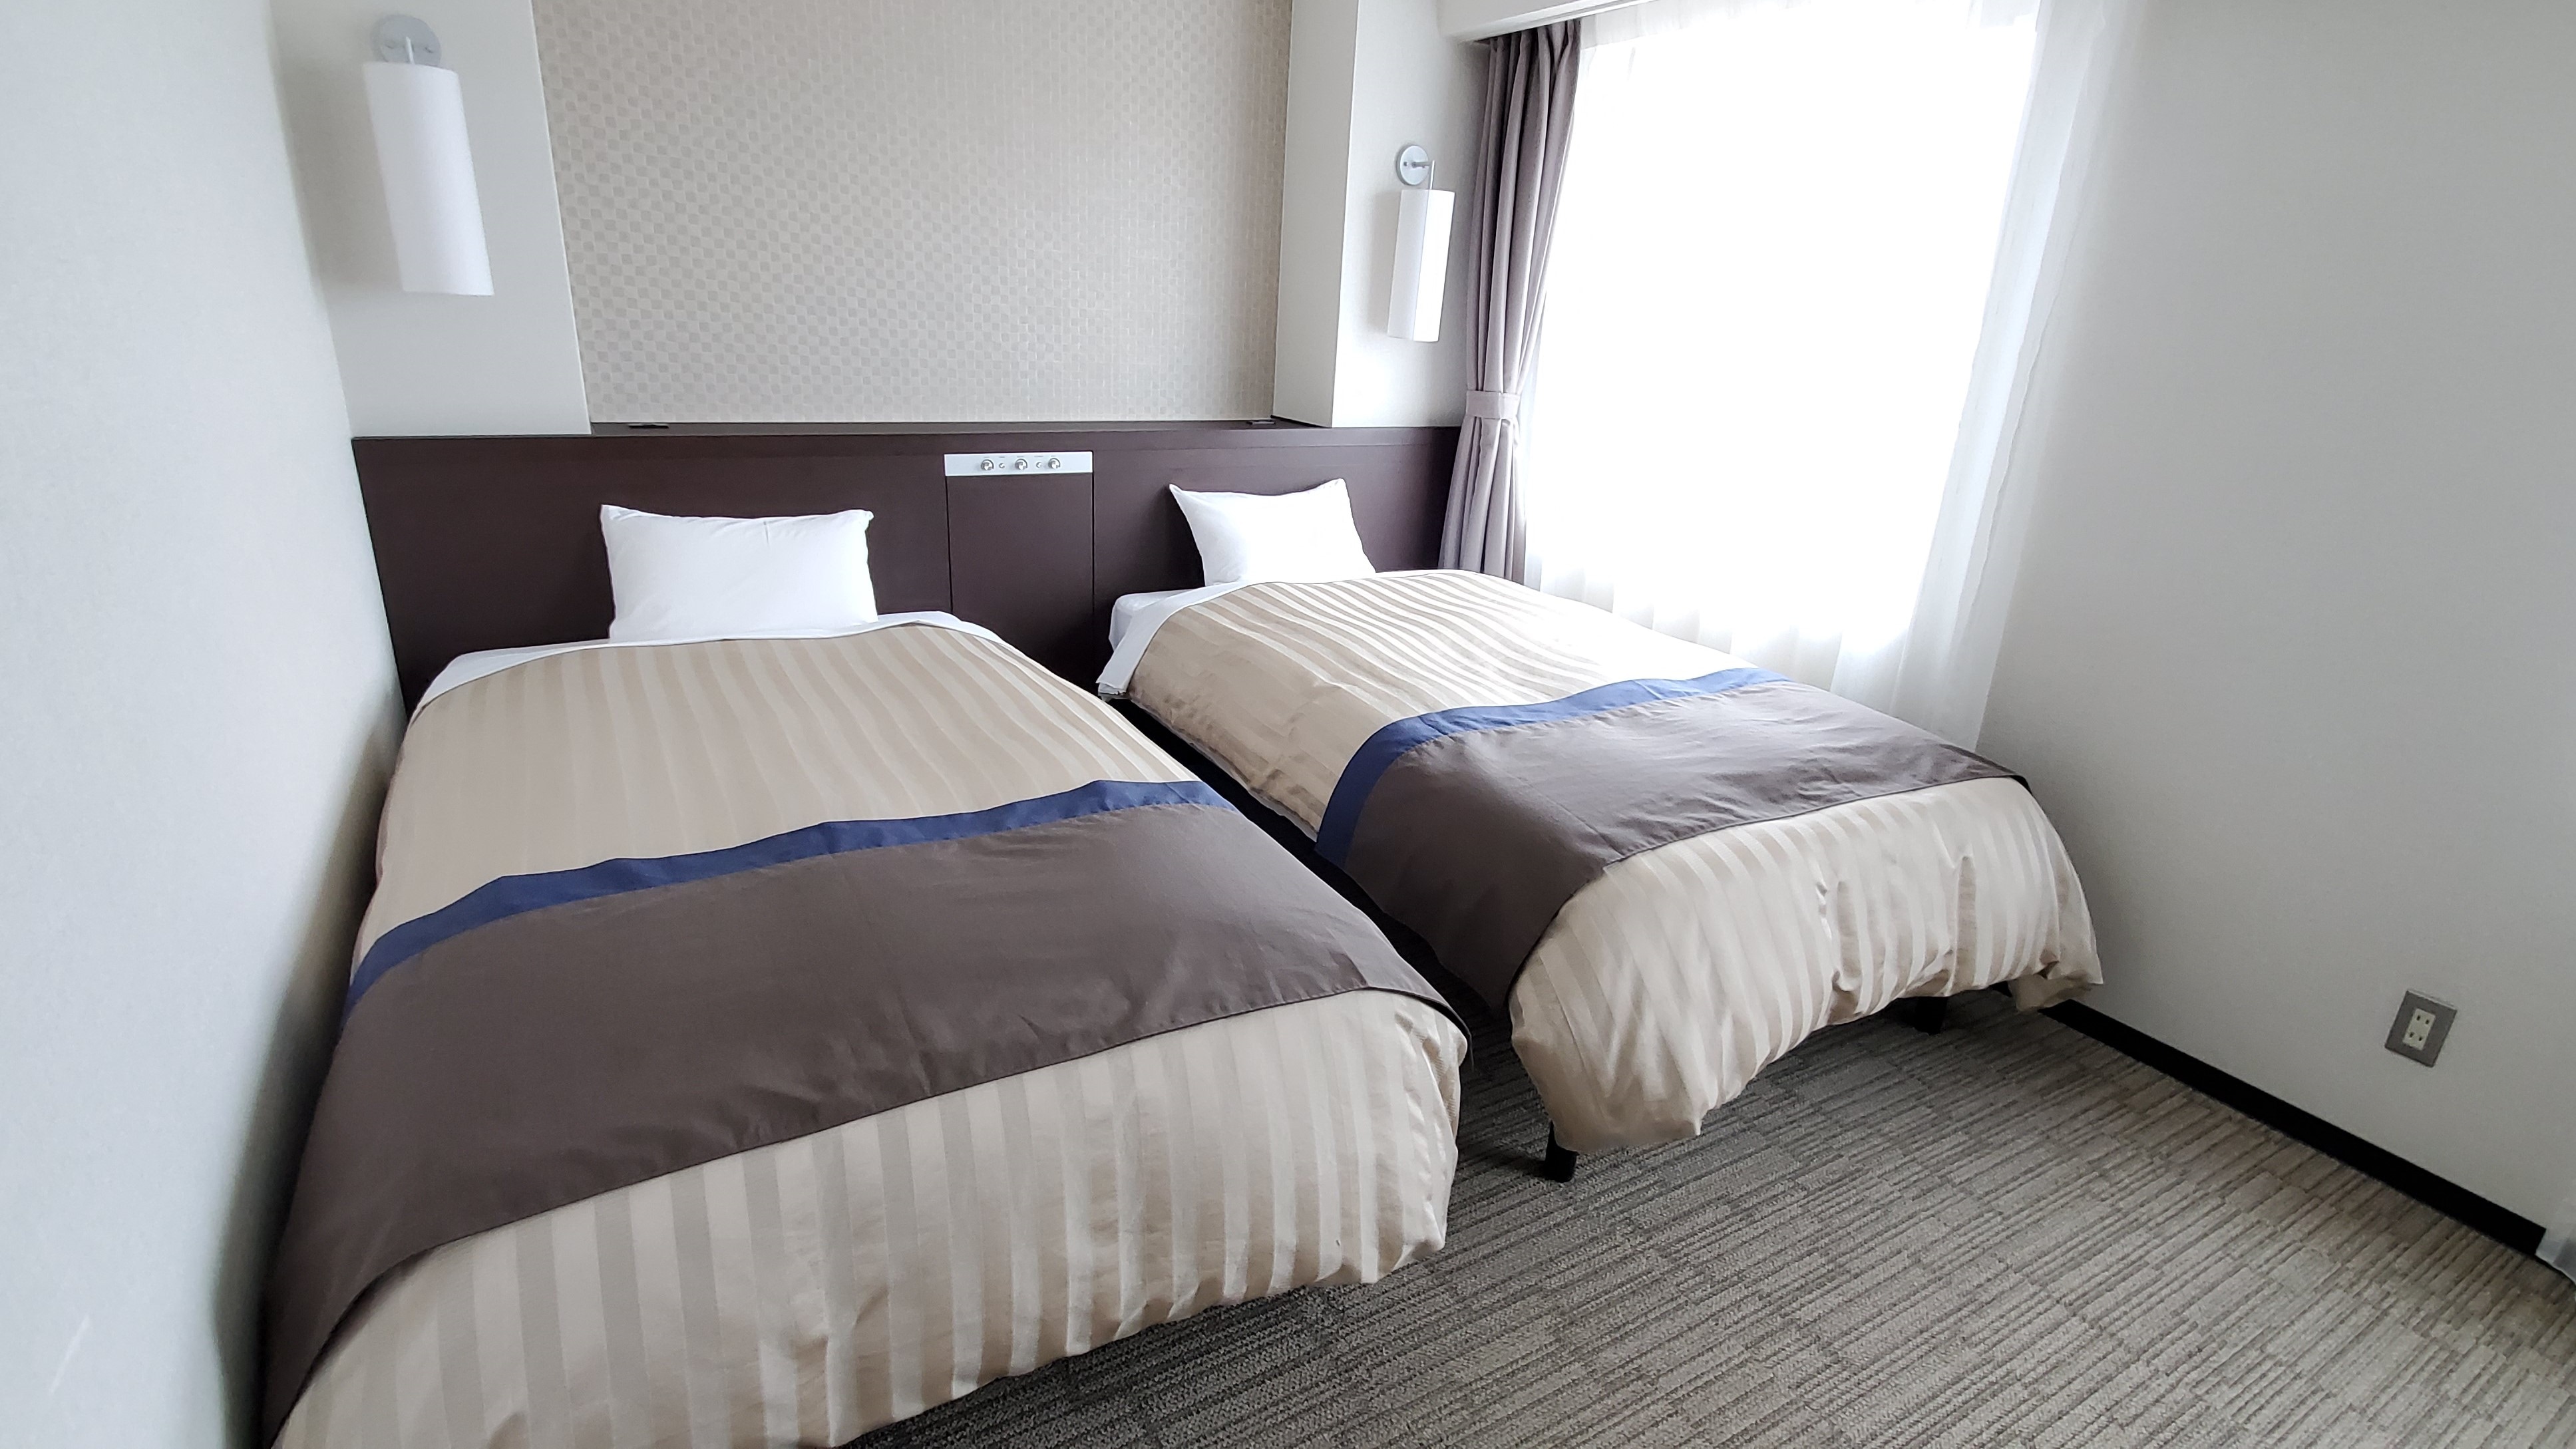 Twin room 32㎡ ☆ 3 people can stay with an extra bed. ☆